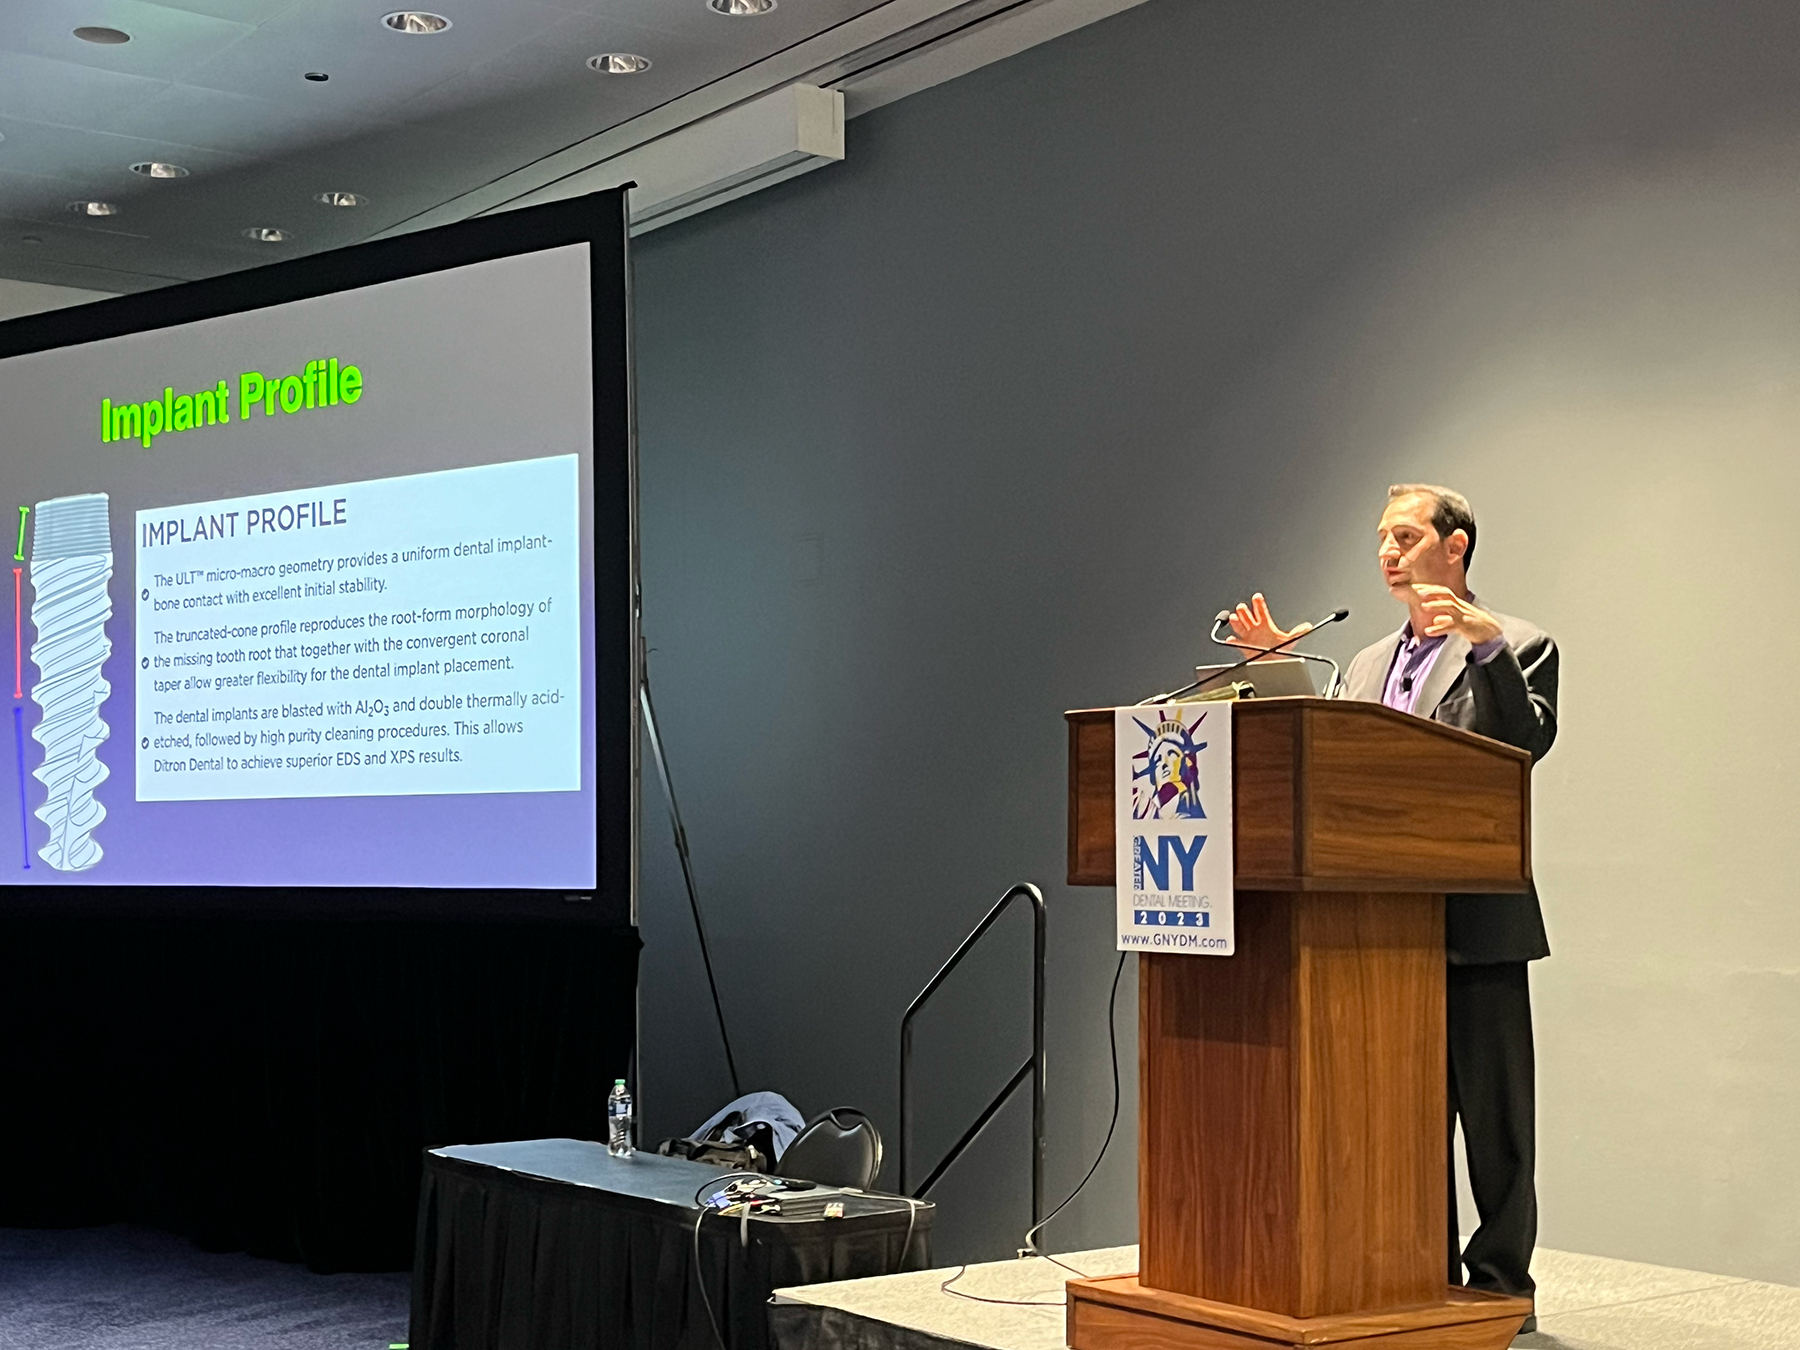 Edward Goldin, DDS speaking about Ditron Dental USA implant solutions at the DPR Product Solutions Center during the 2023 Greater New York Dental Meeting.